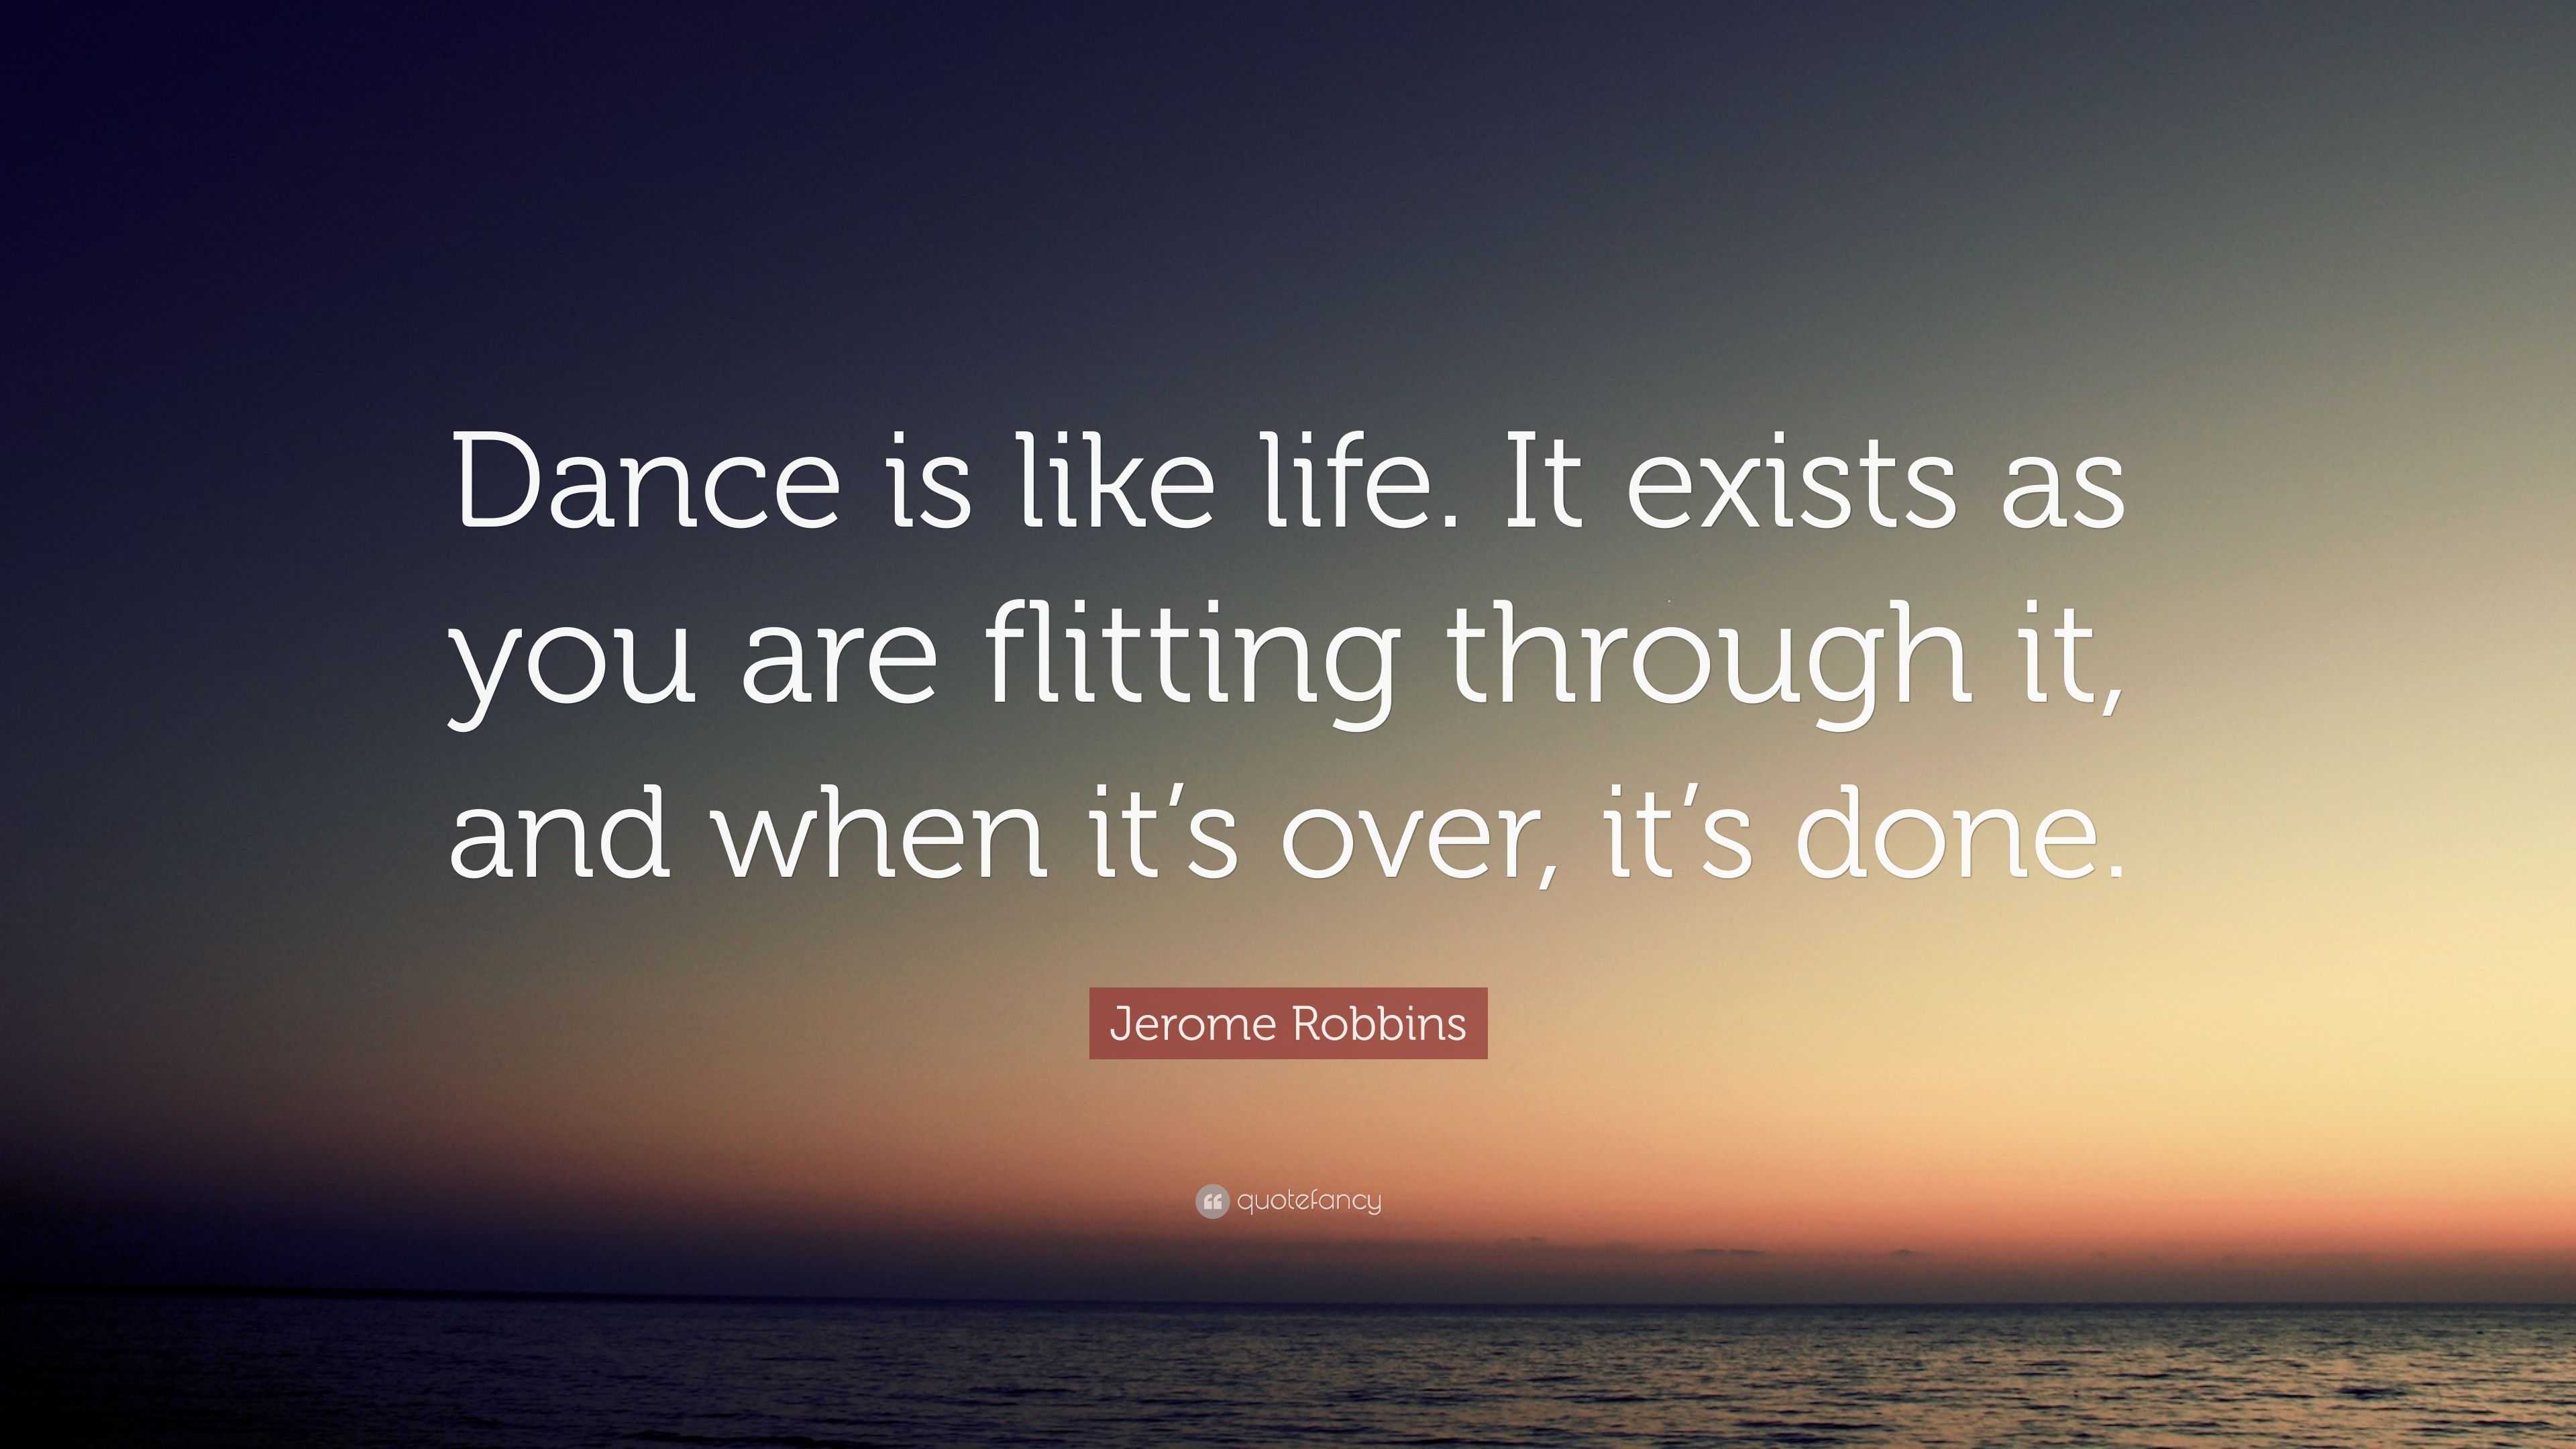 Jerome Robbins Quote “Dance is like life It exists as you are flitting